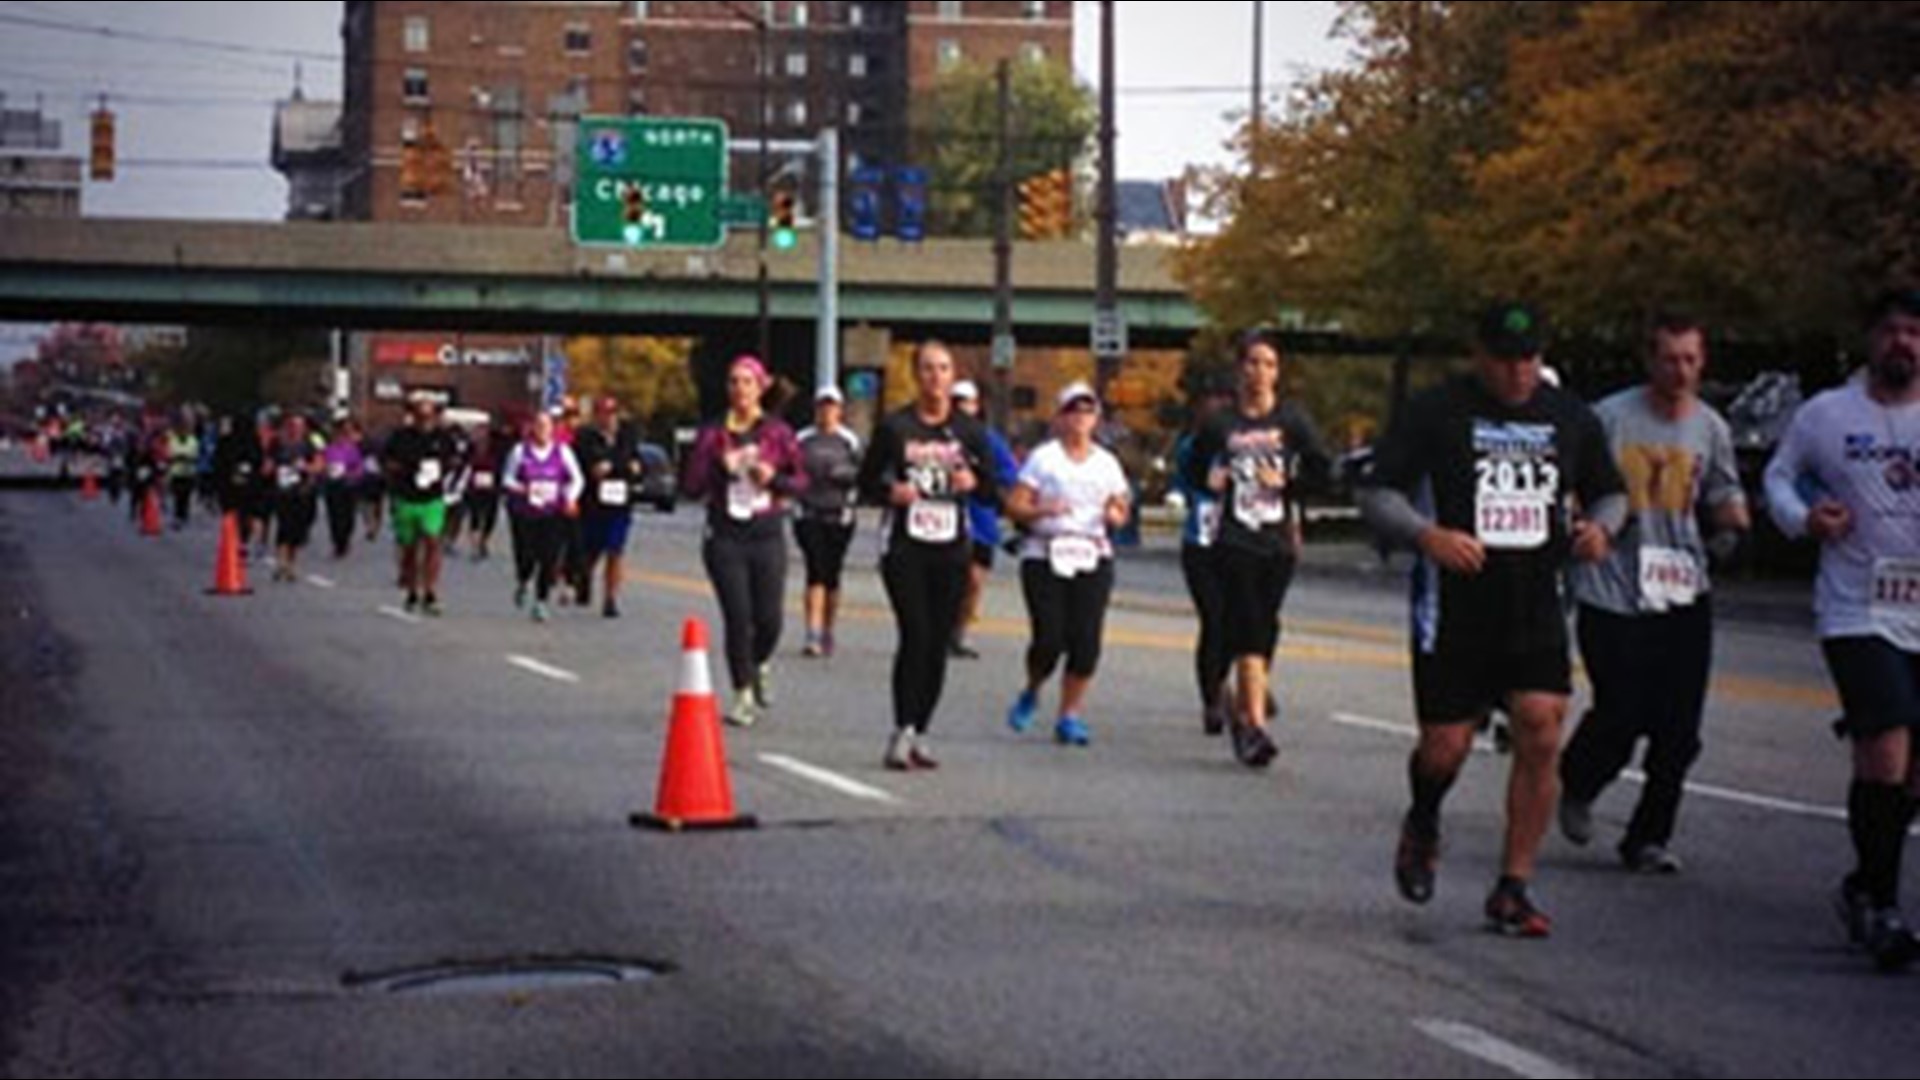 The "Marathon in a Month" race allows runners and walkers to complete 26.2 miles at their leisure during the month of November.